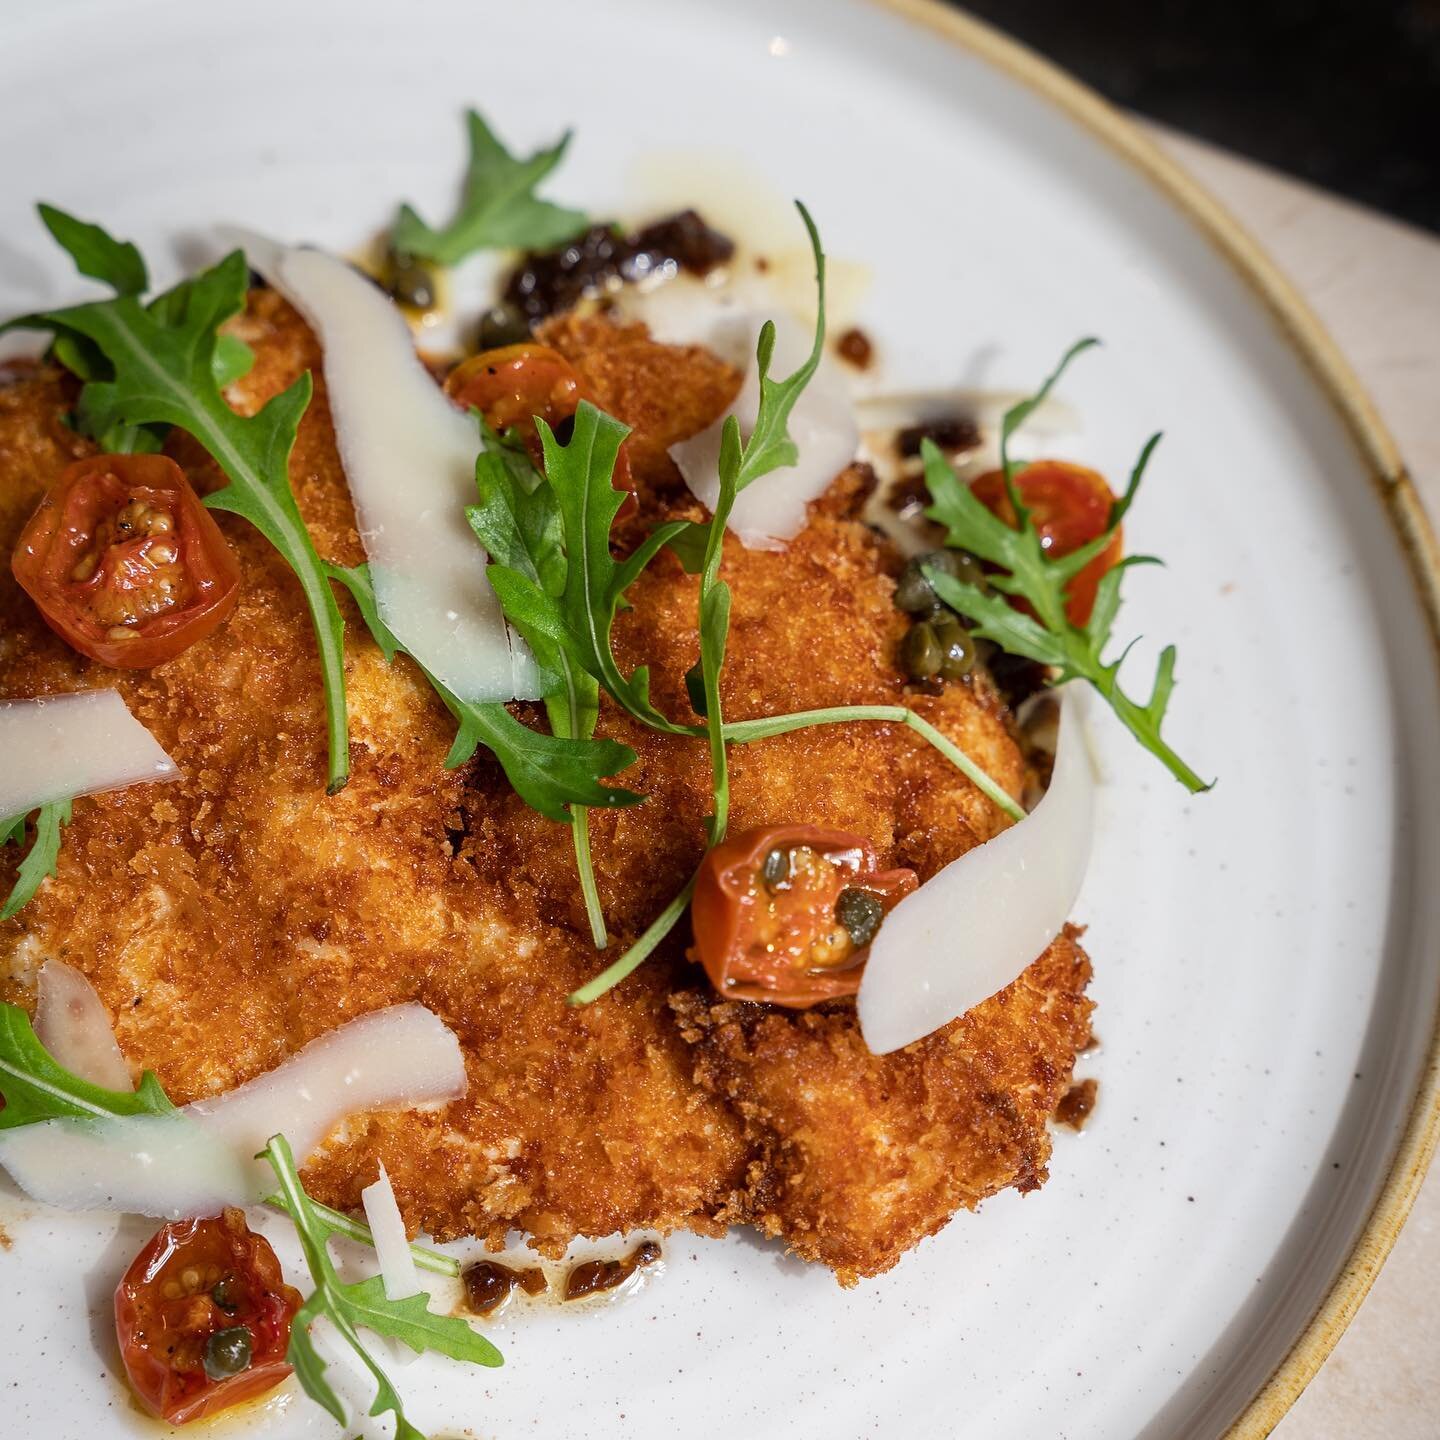 Our chicken Milanese has a deliciously crispy coating and is served with tomato sauce, capers and olives. A traditional Italian dish &amp; the perfect mid-week supper.
.
.
.
.
#TerraModerna #Italianfood #BelsizePark